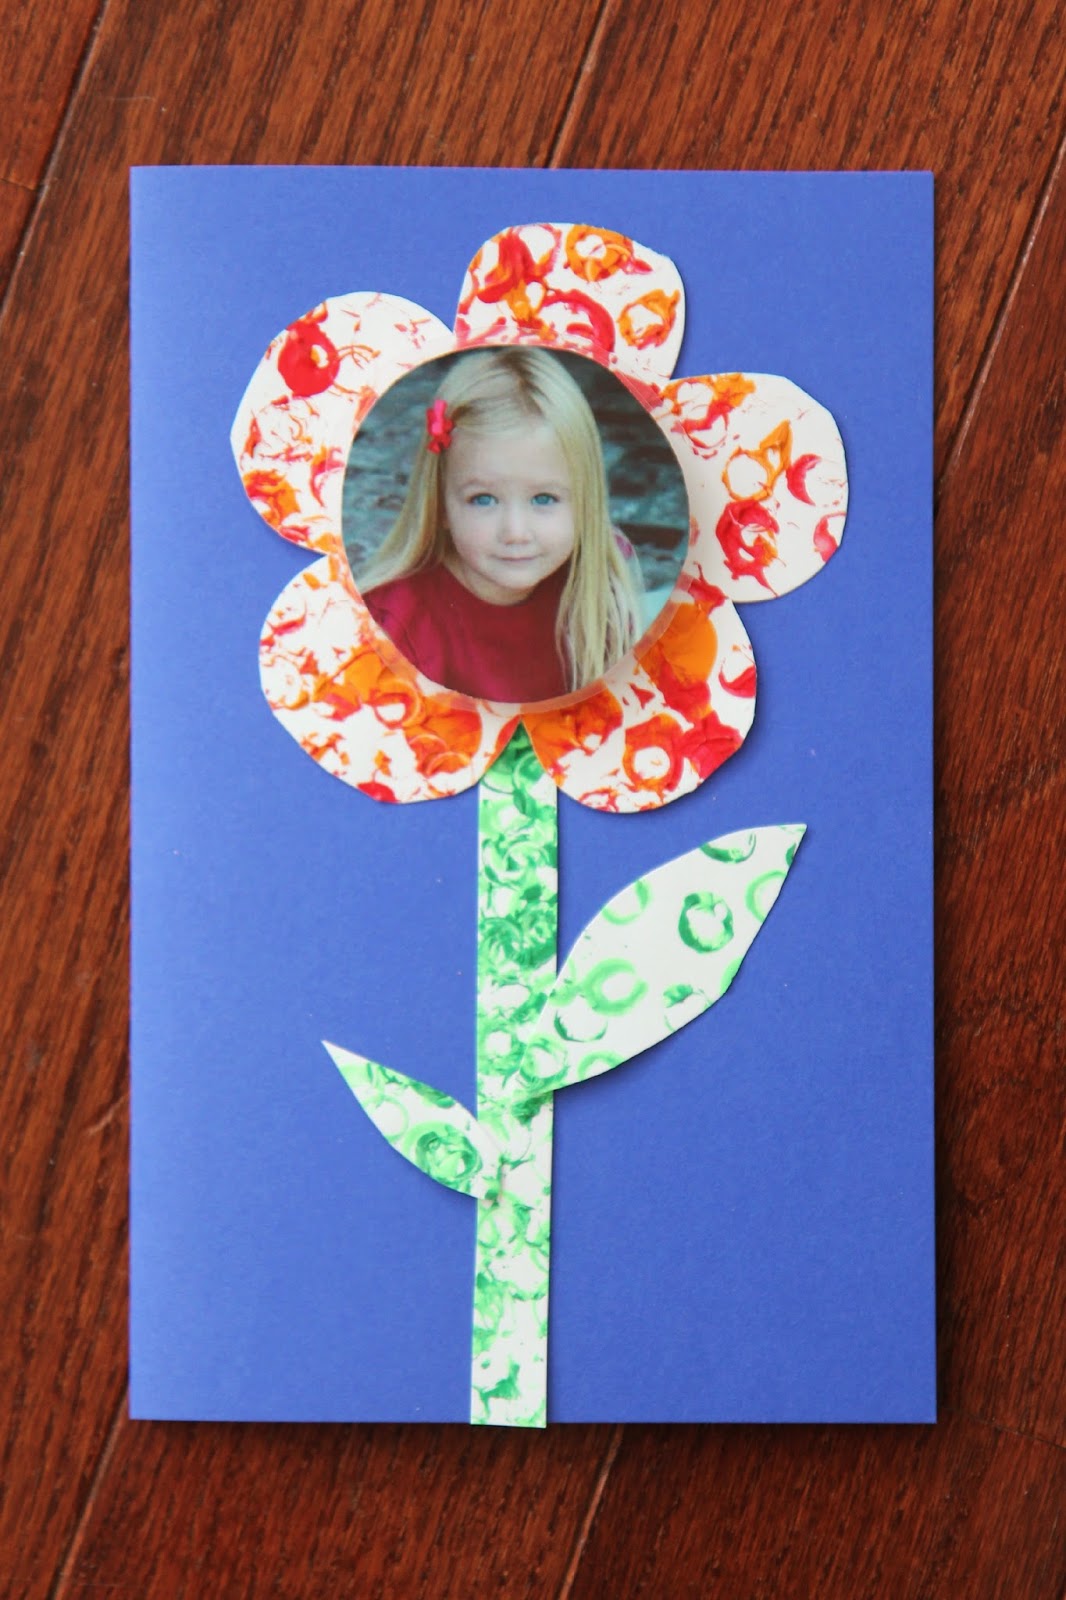 Toddler Approved!: LEGO Printed Photo Mother's Day Card